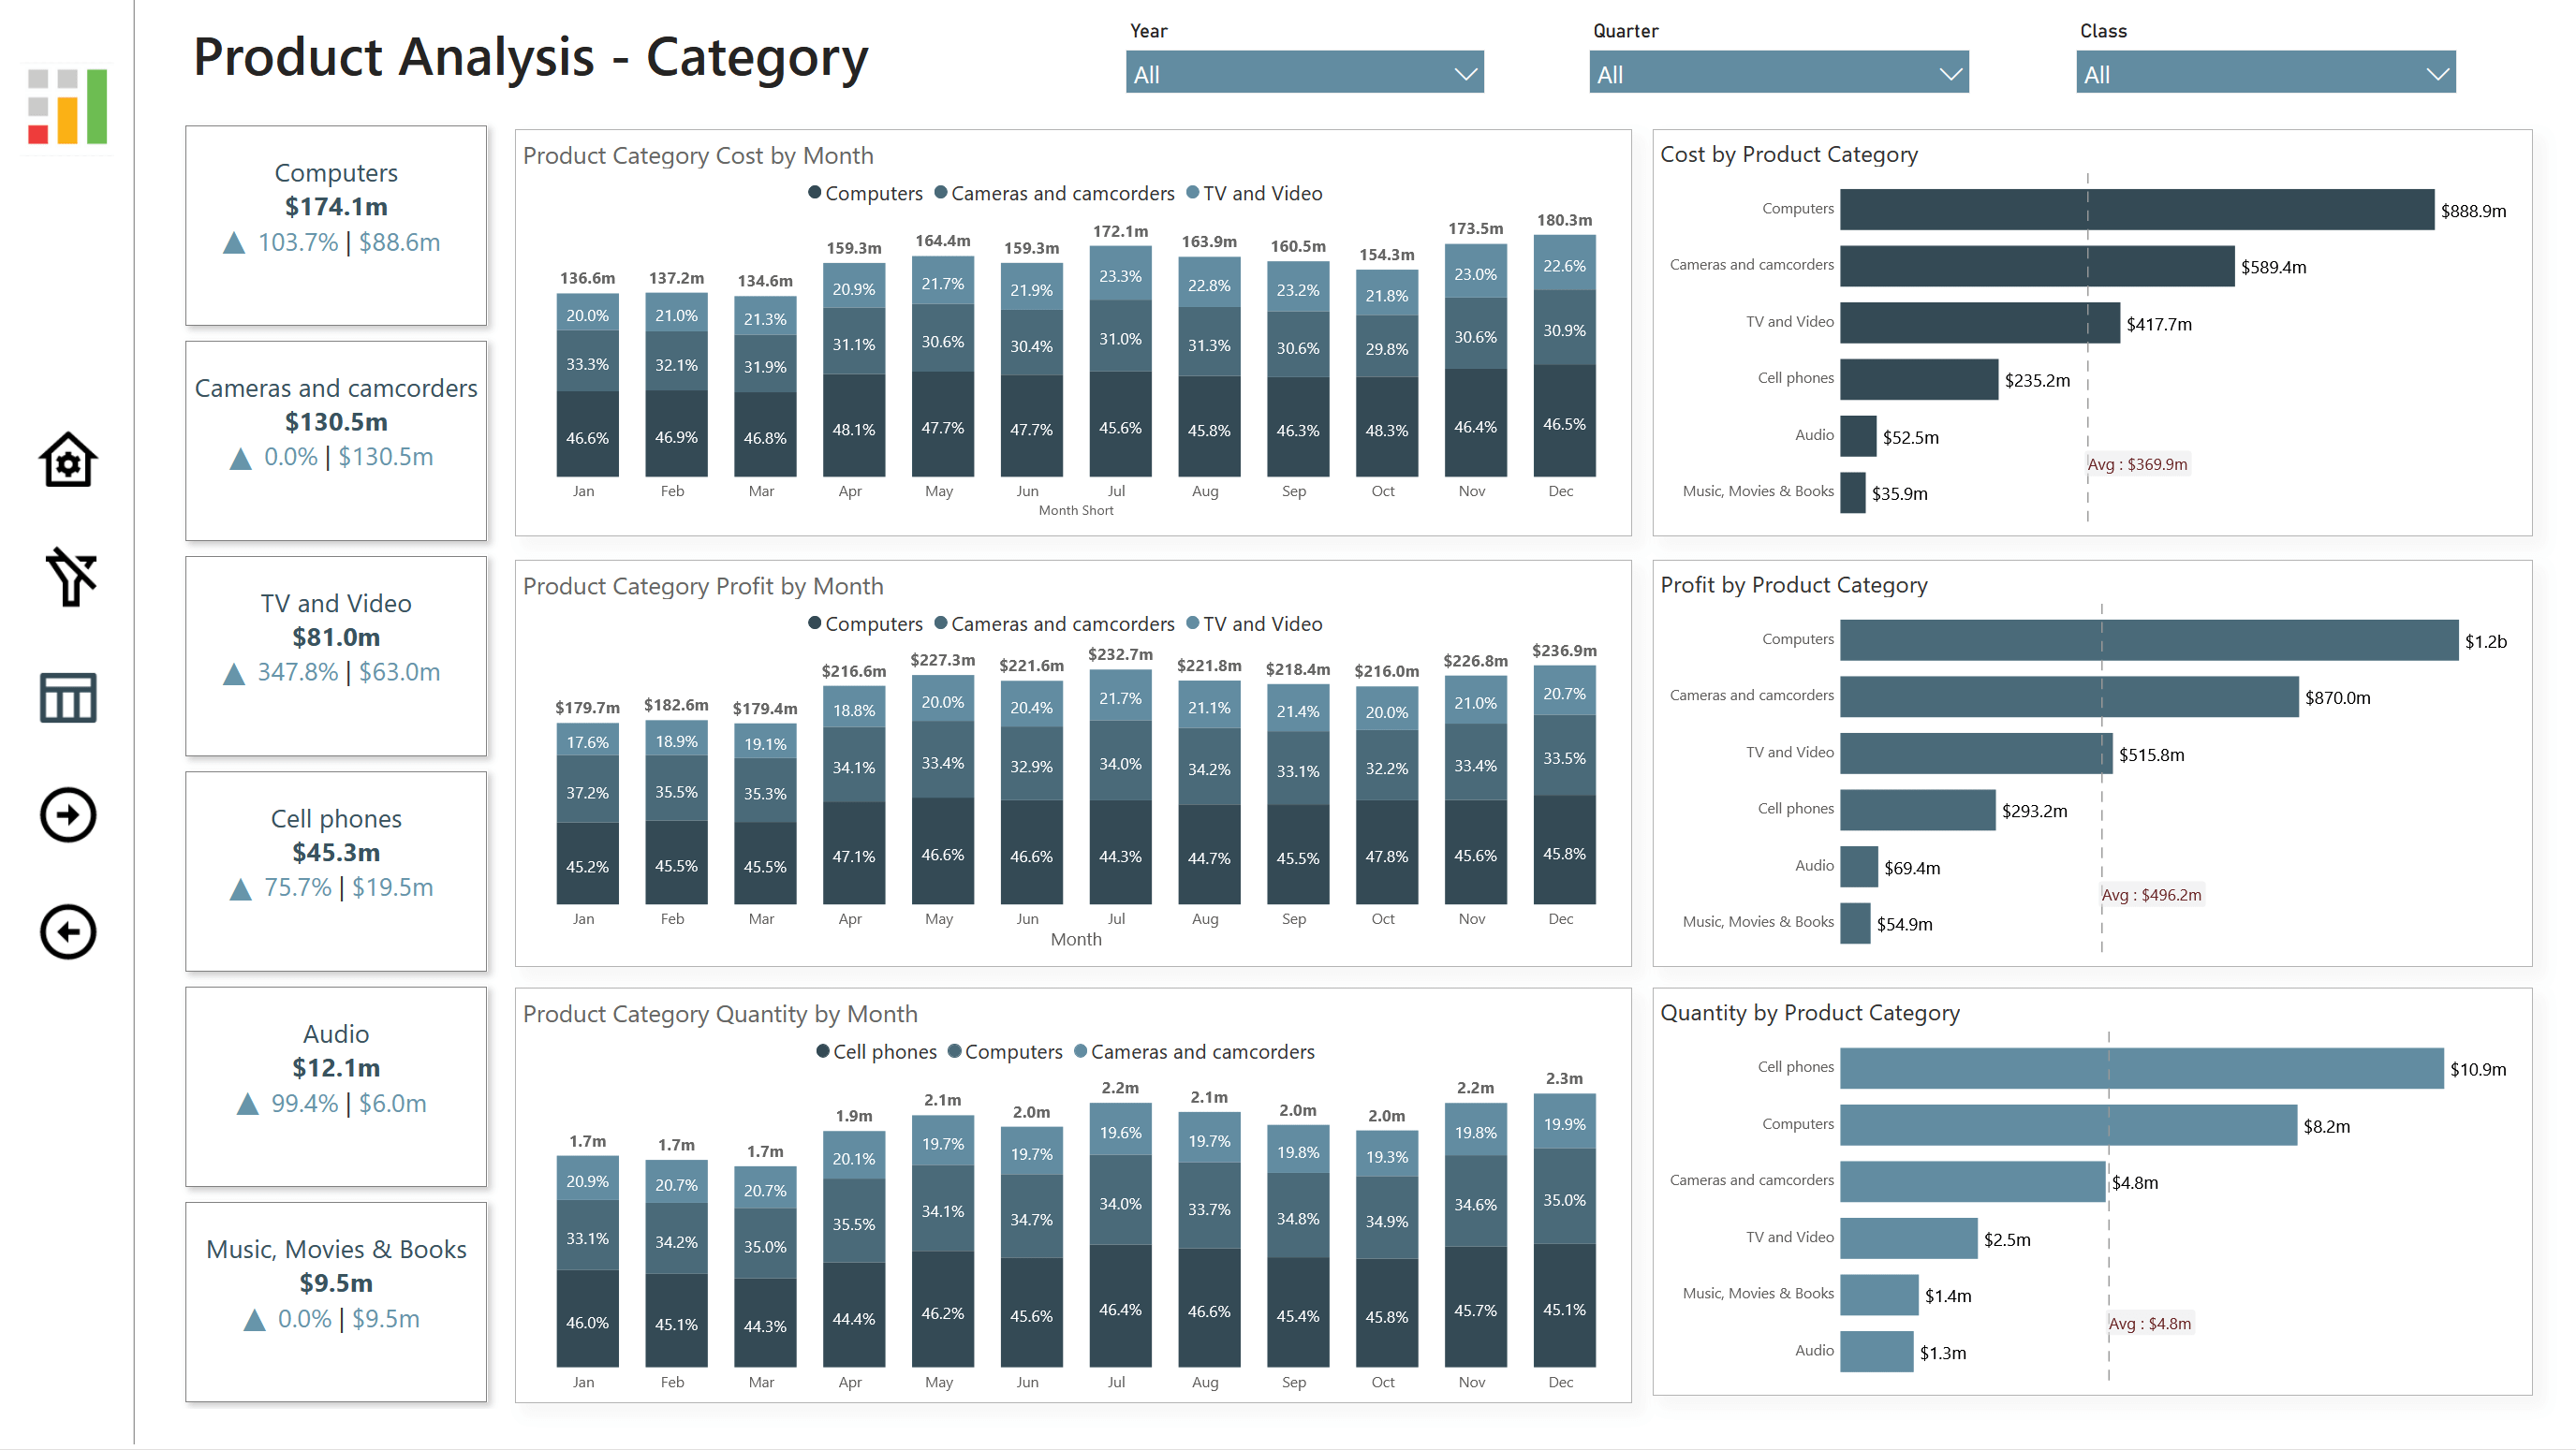 Product analysis by category